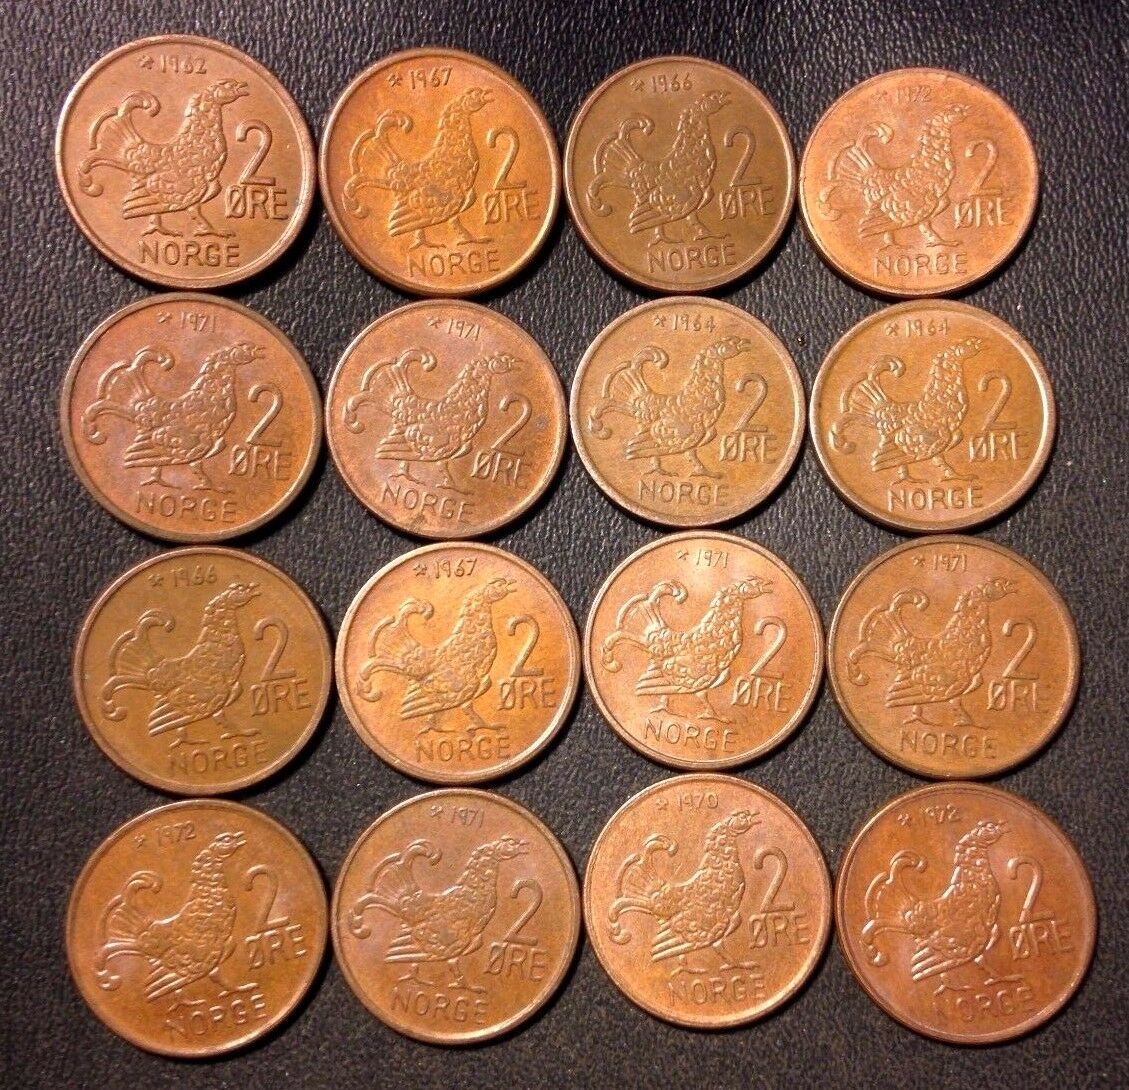 Vintage Norway Coin Lot - 2 Ore - Moor Hen Series - 16 Coins - Free Shipping